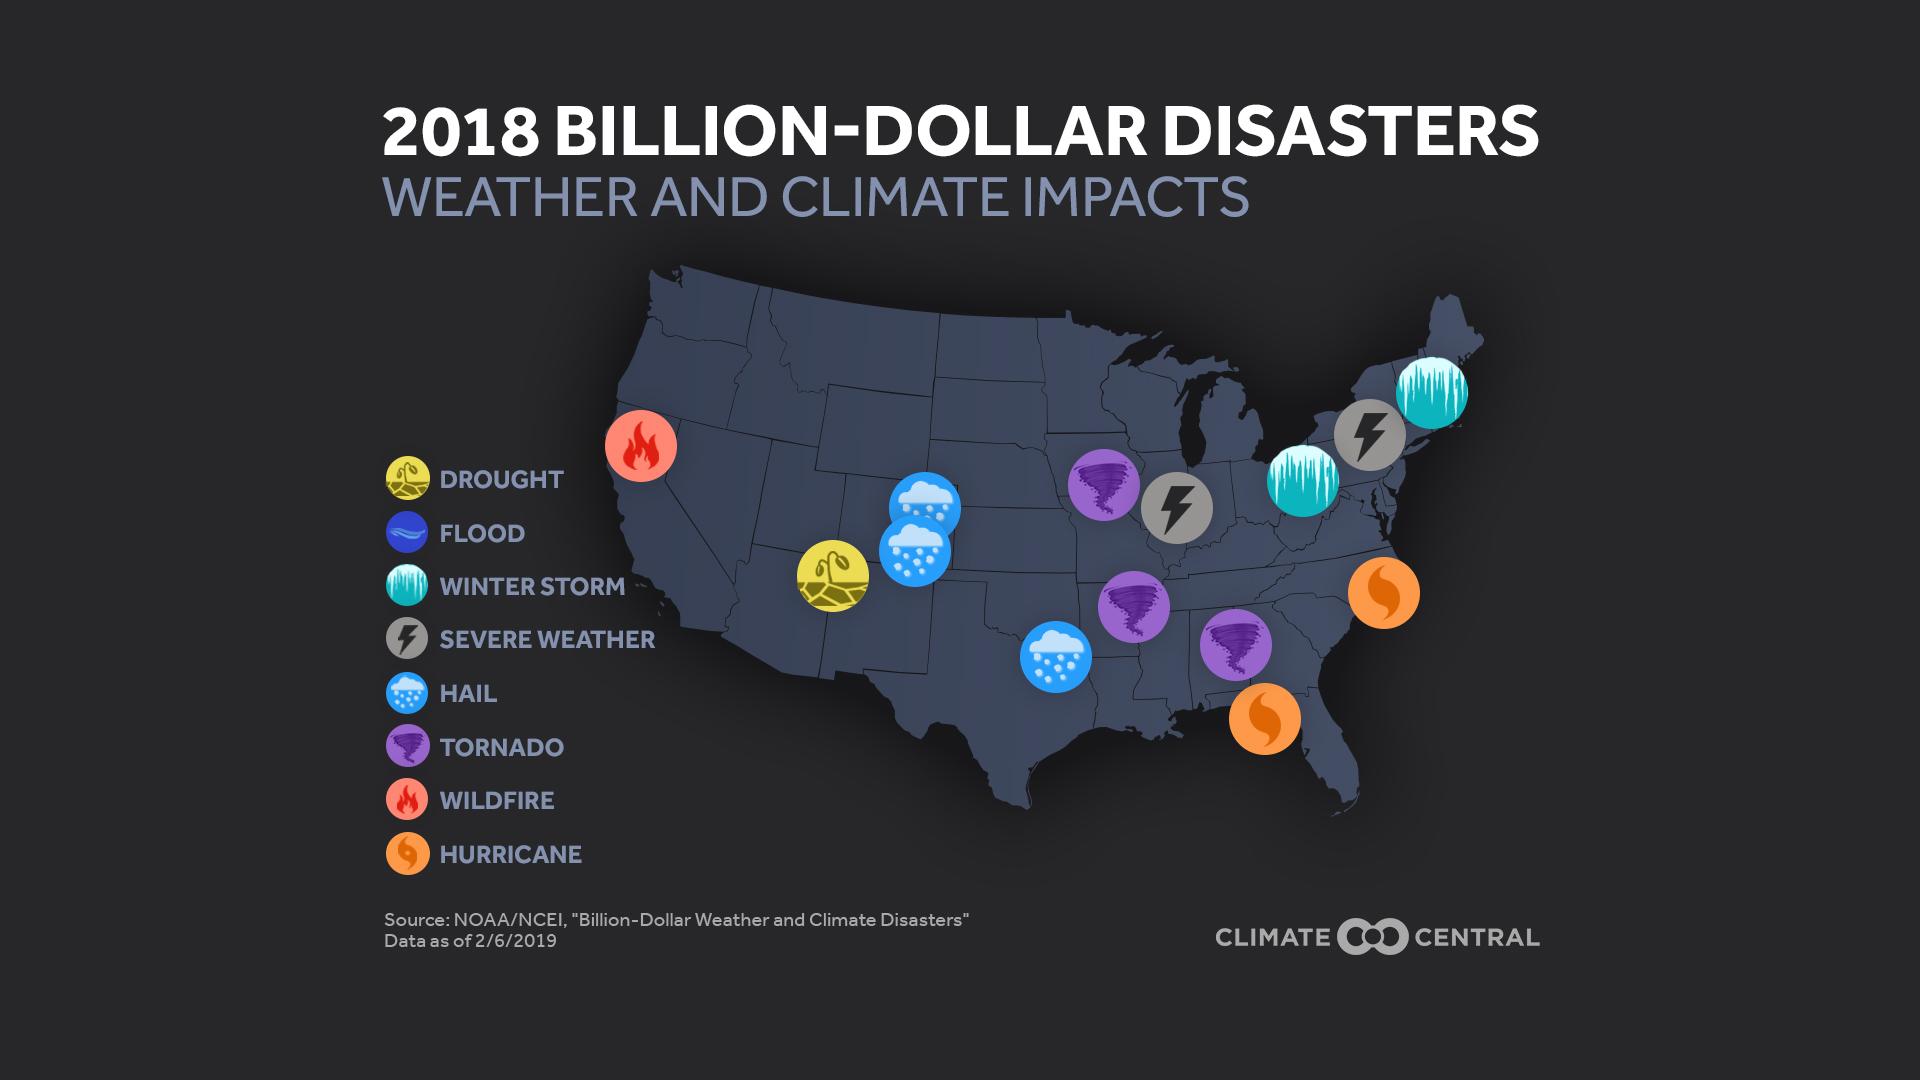 Set 4 - 2018 Year in Review: Temperatures & Billion-Dollar Disasters